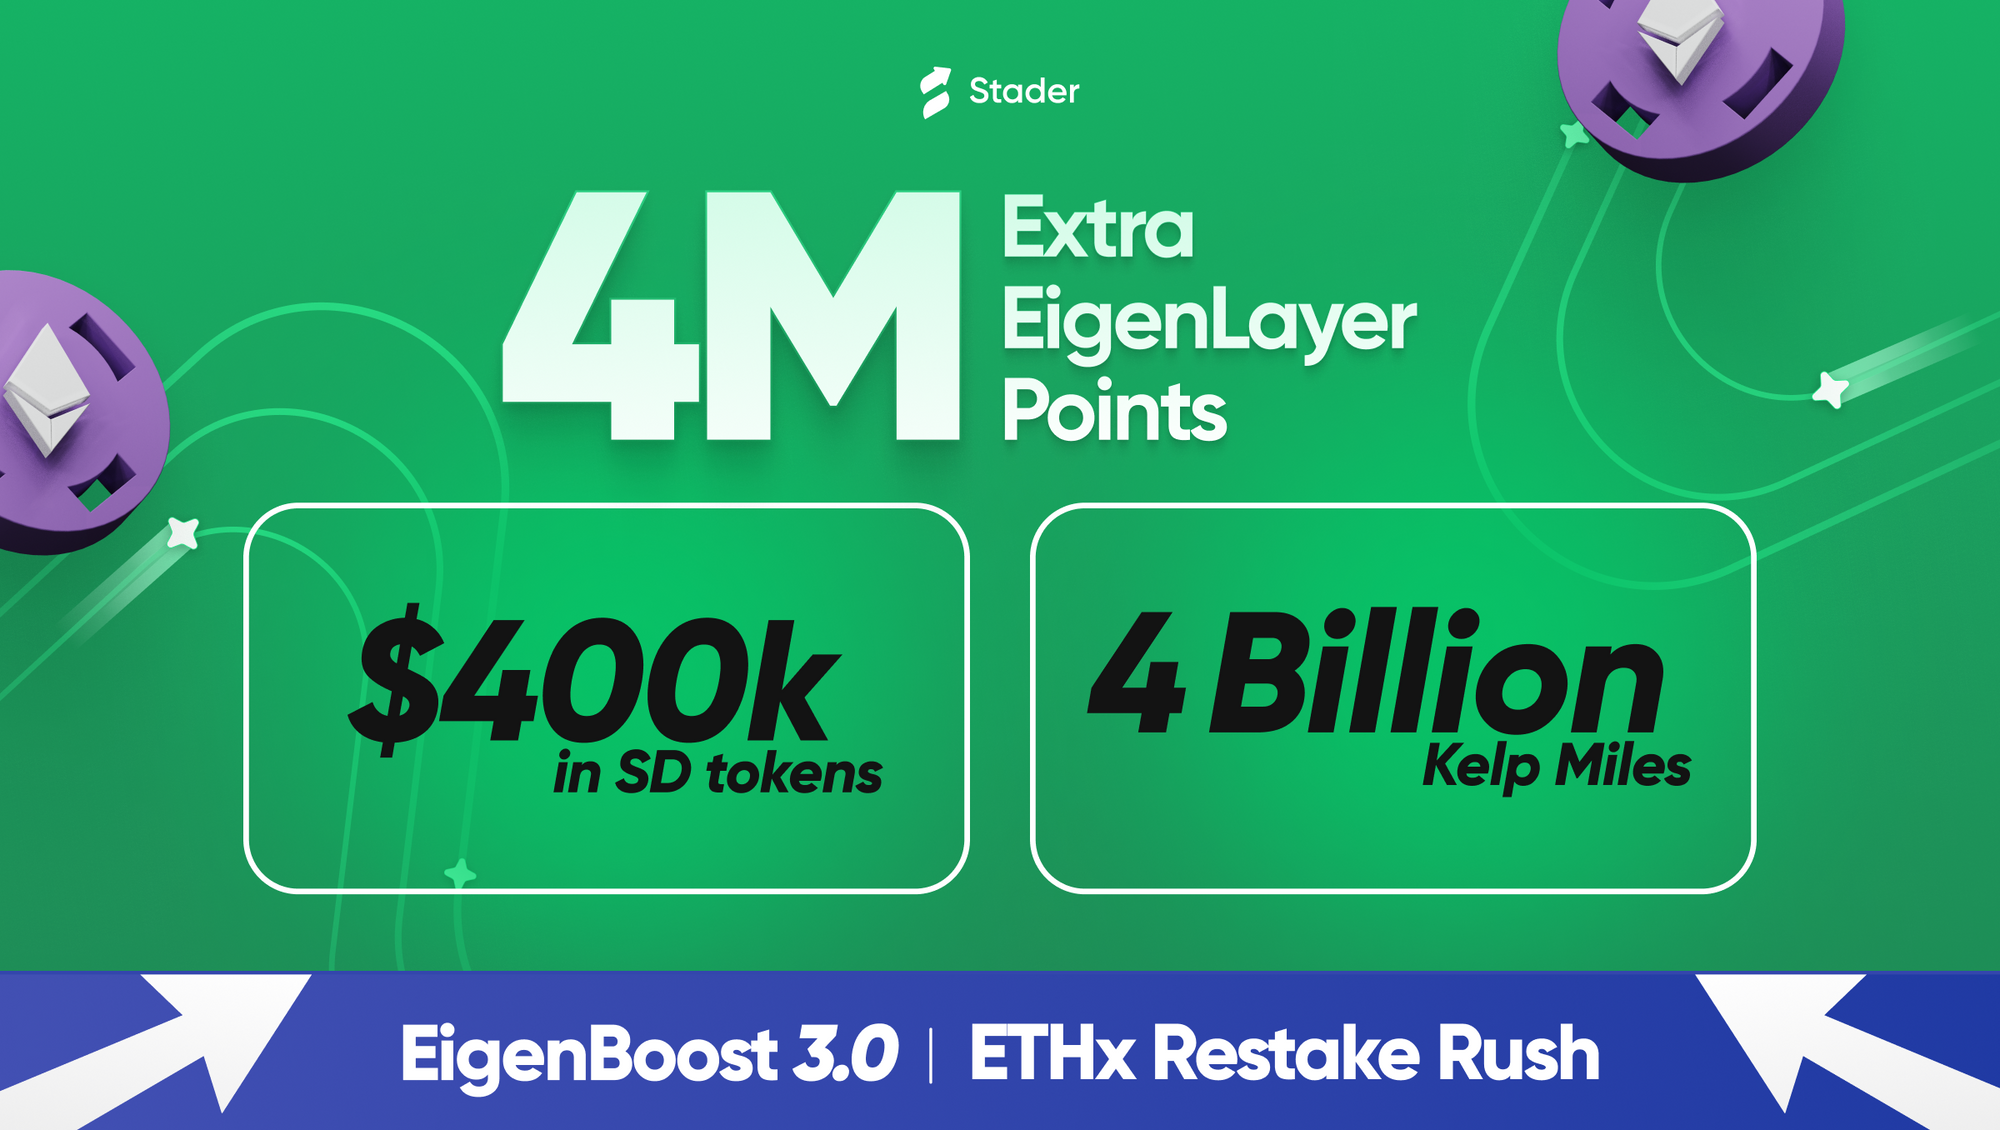 EigenBoost 3.0: Power Up your ETHx Restakes